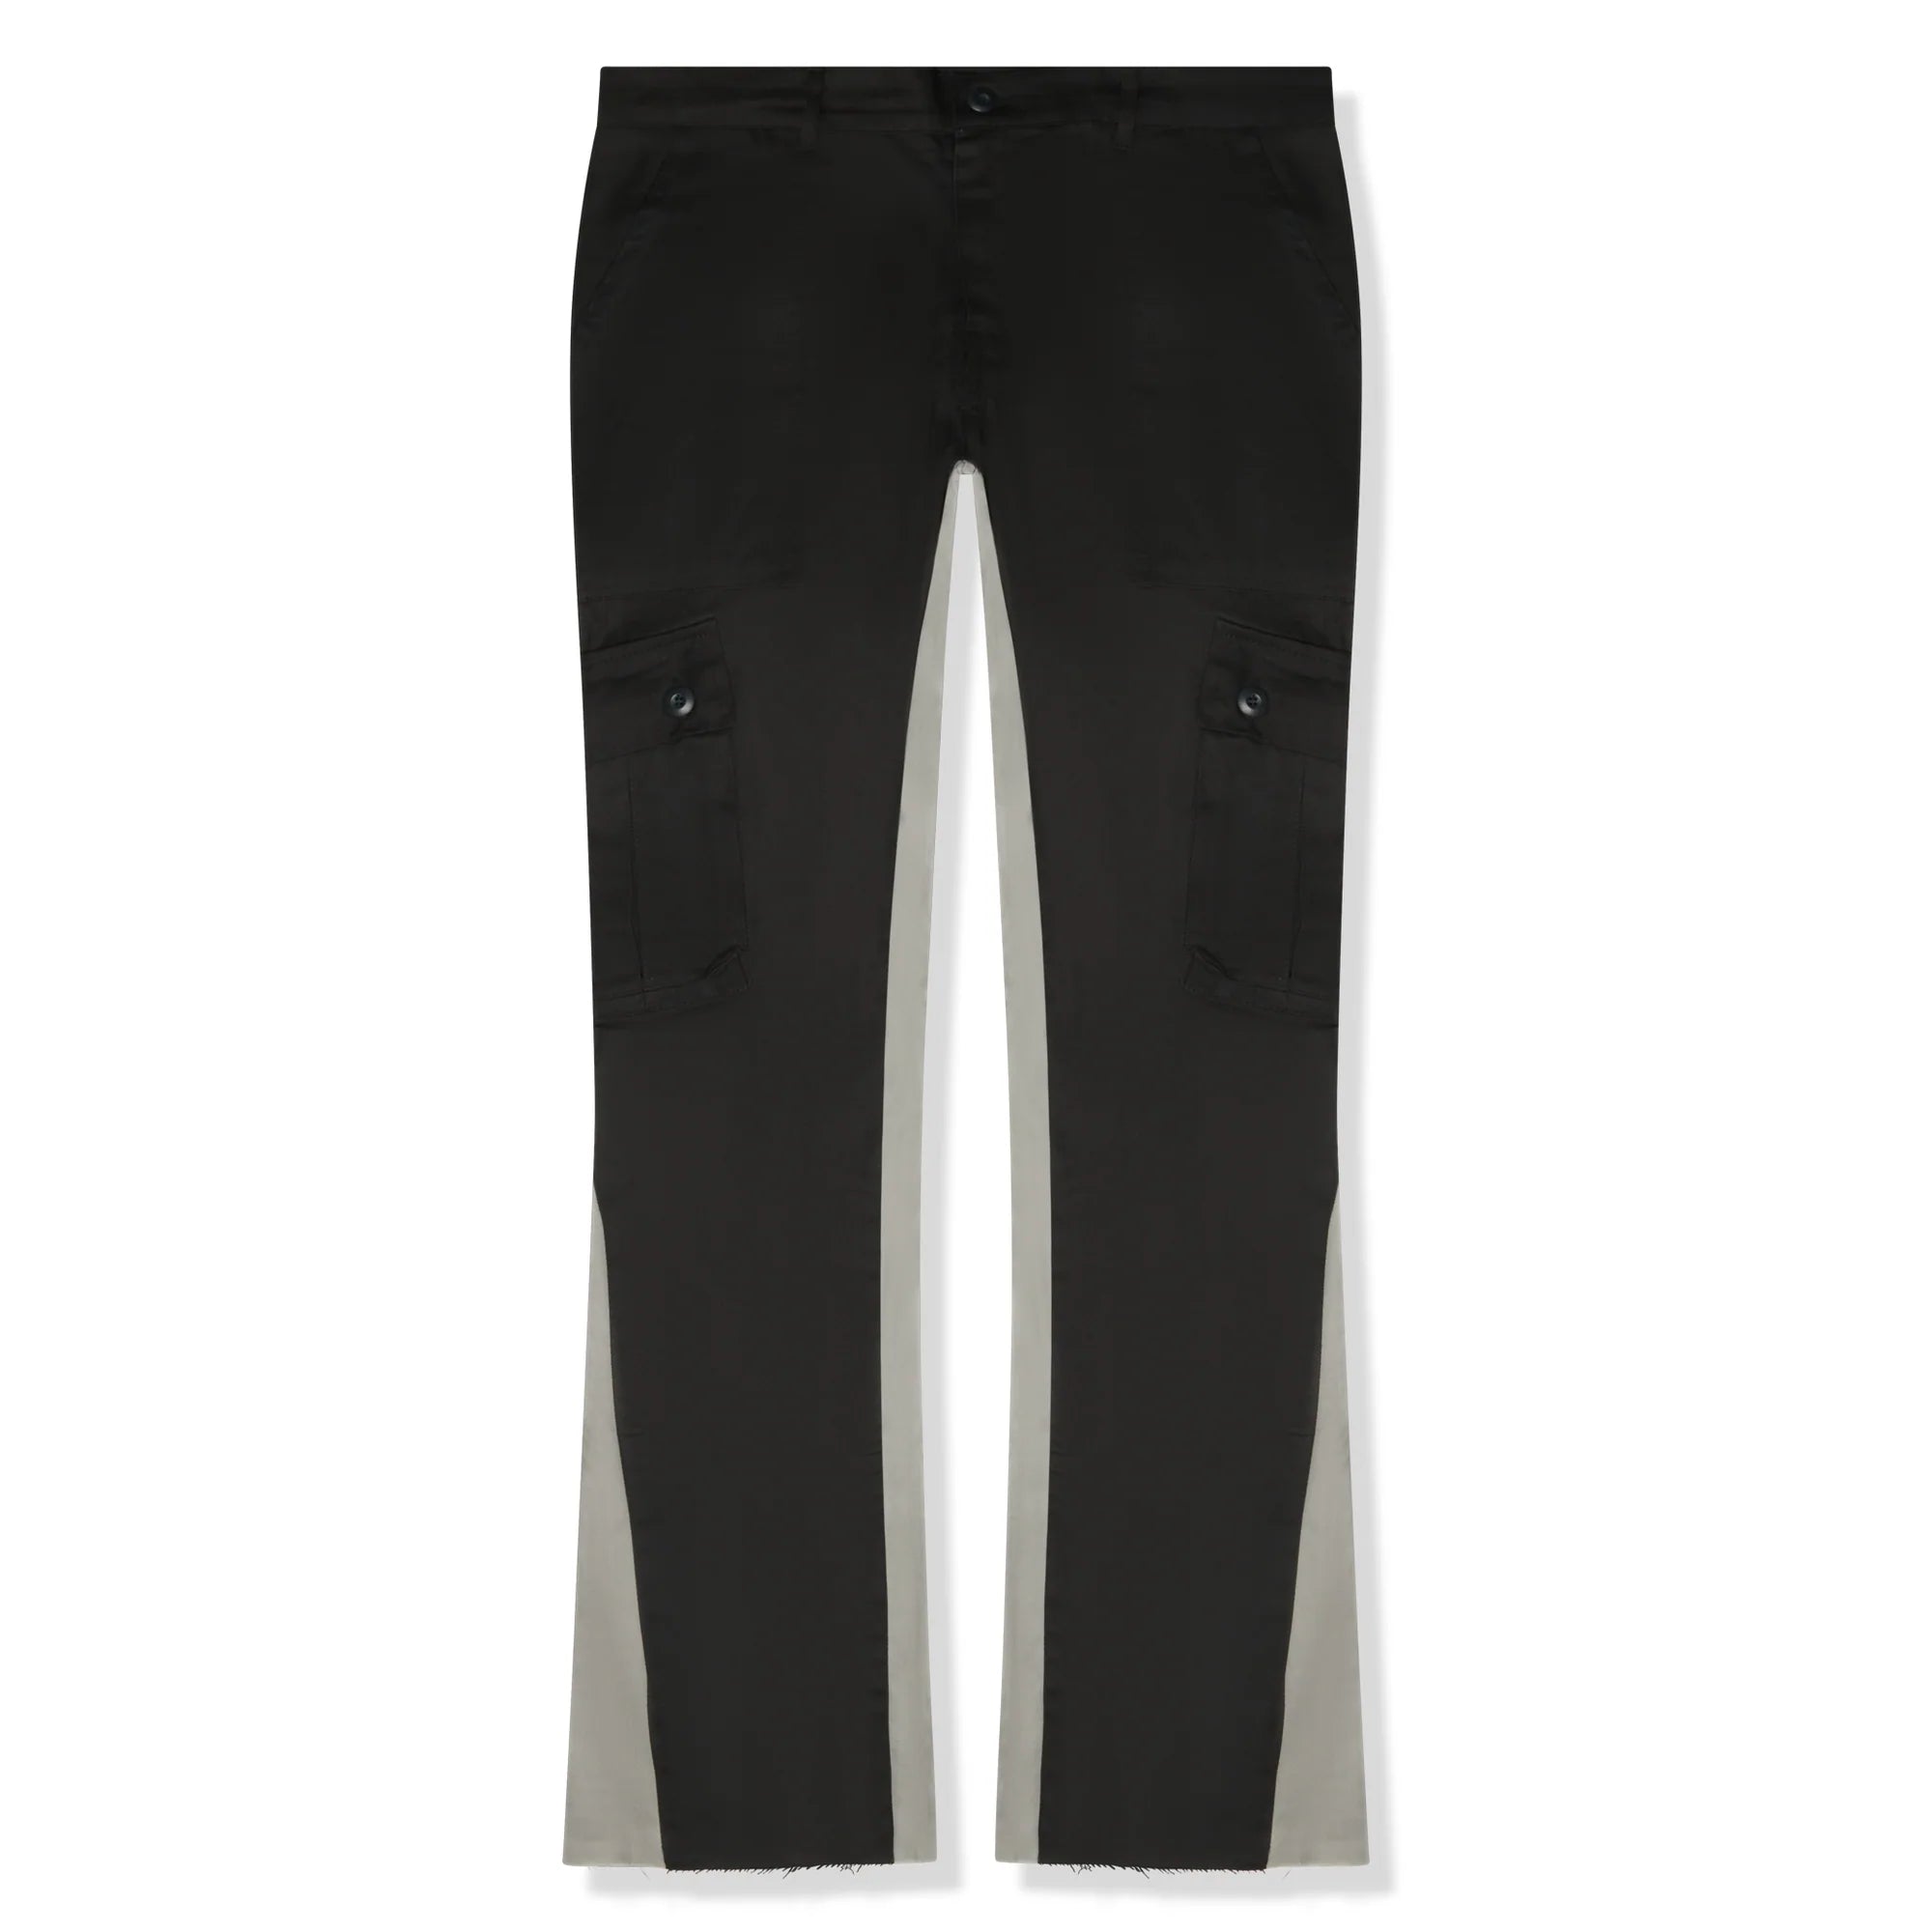 CARGO FLARE TROUSERS - BLACK